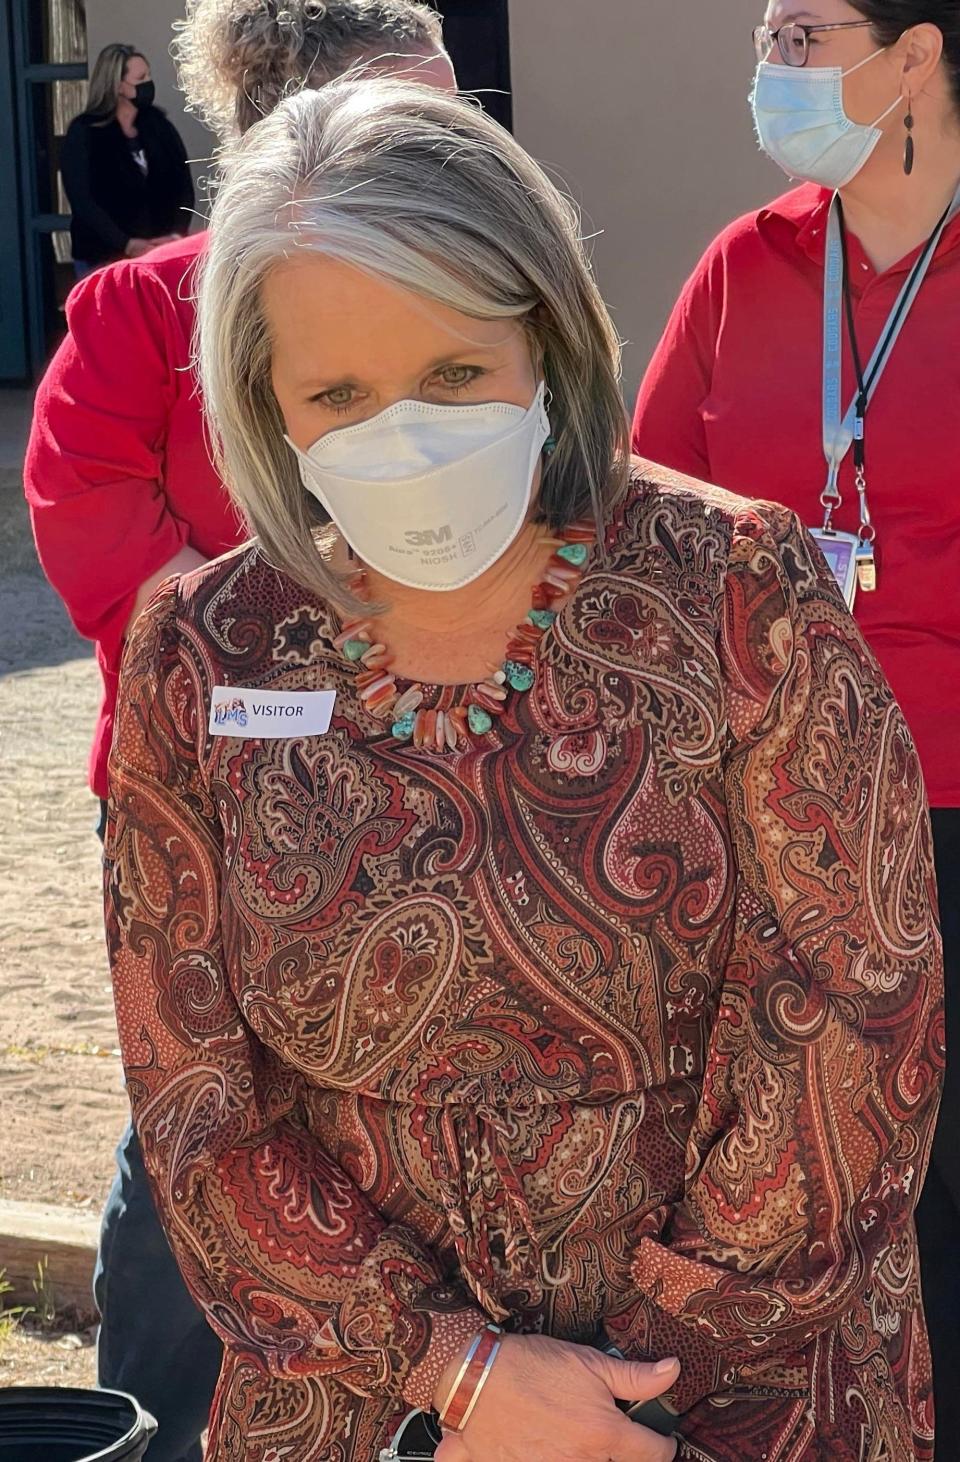 New Mexico Gov. Michelle Lujan Grisham wears an N95 mask during a visit to Lynn Middle School in Las Cruces on Friday, Nov. 12, 2021.